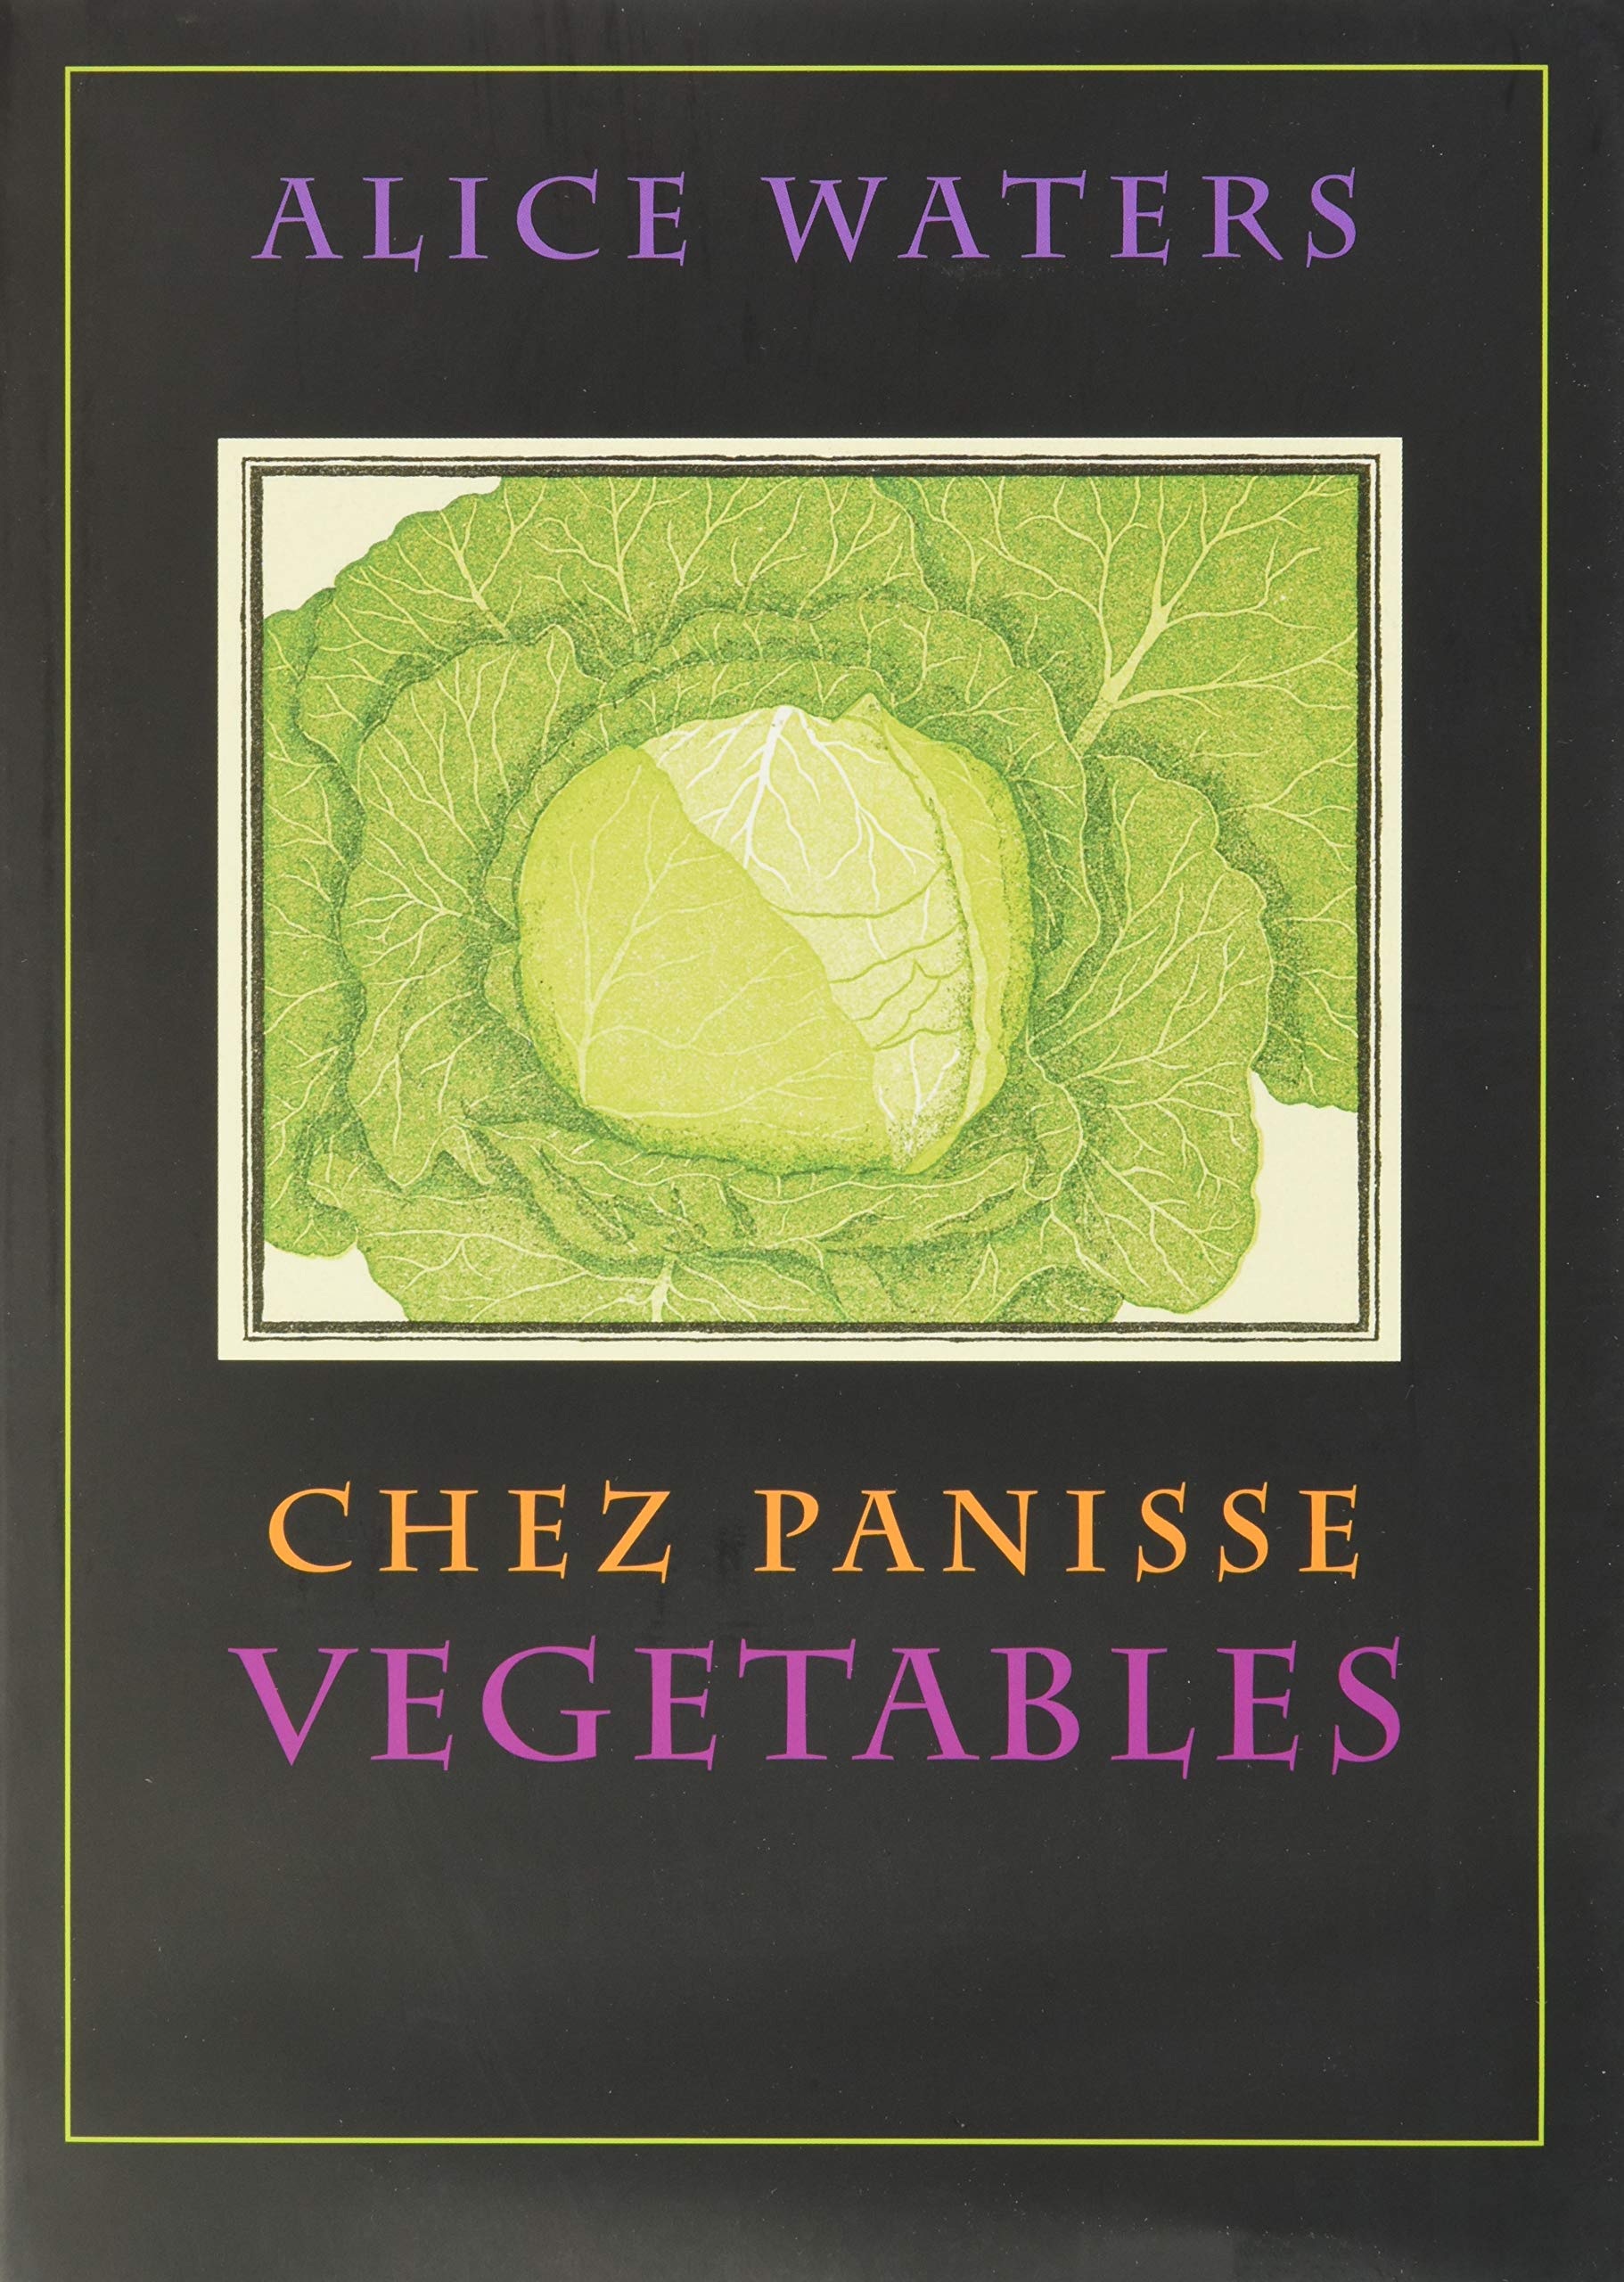 Chez Panisse Vegetables (Alice Waters) *Signed*